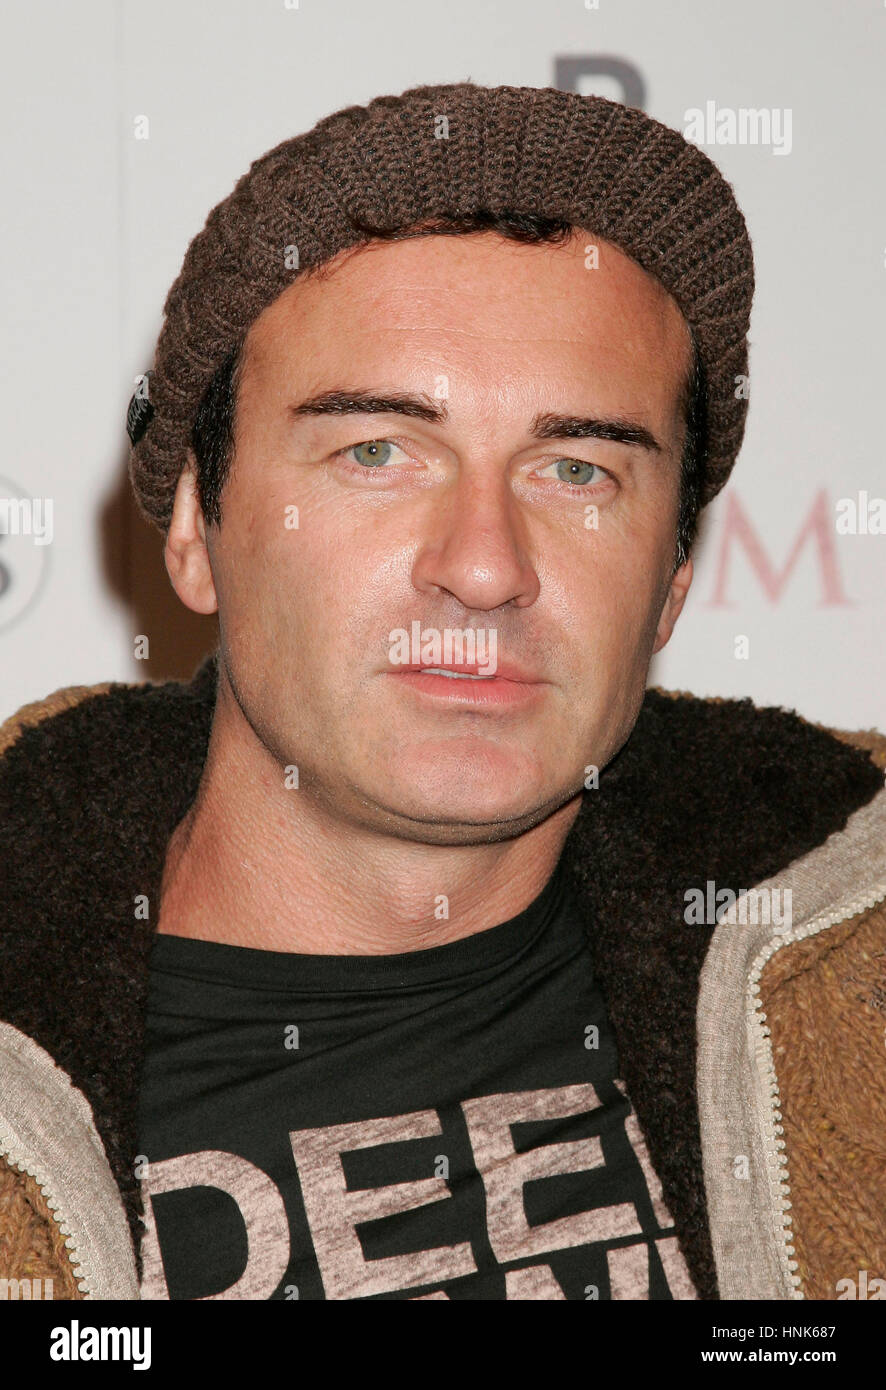 Julian McMahon arrives at the Maxim Super Bowl party at the Stone Rose at the Fairmont Scottsdale Princess in Scottsdale, AZ on Friday, Feb. 1, 2008. Photo by Francis Specker Stock Photo